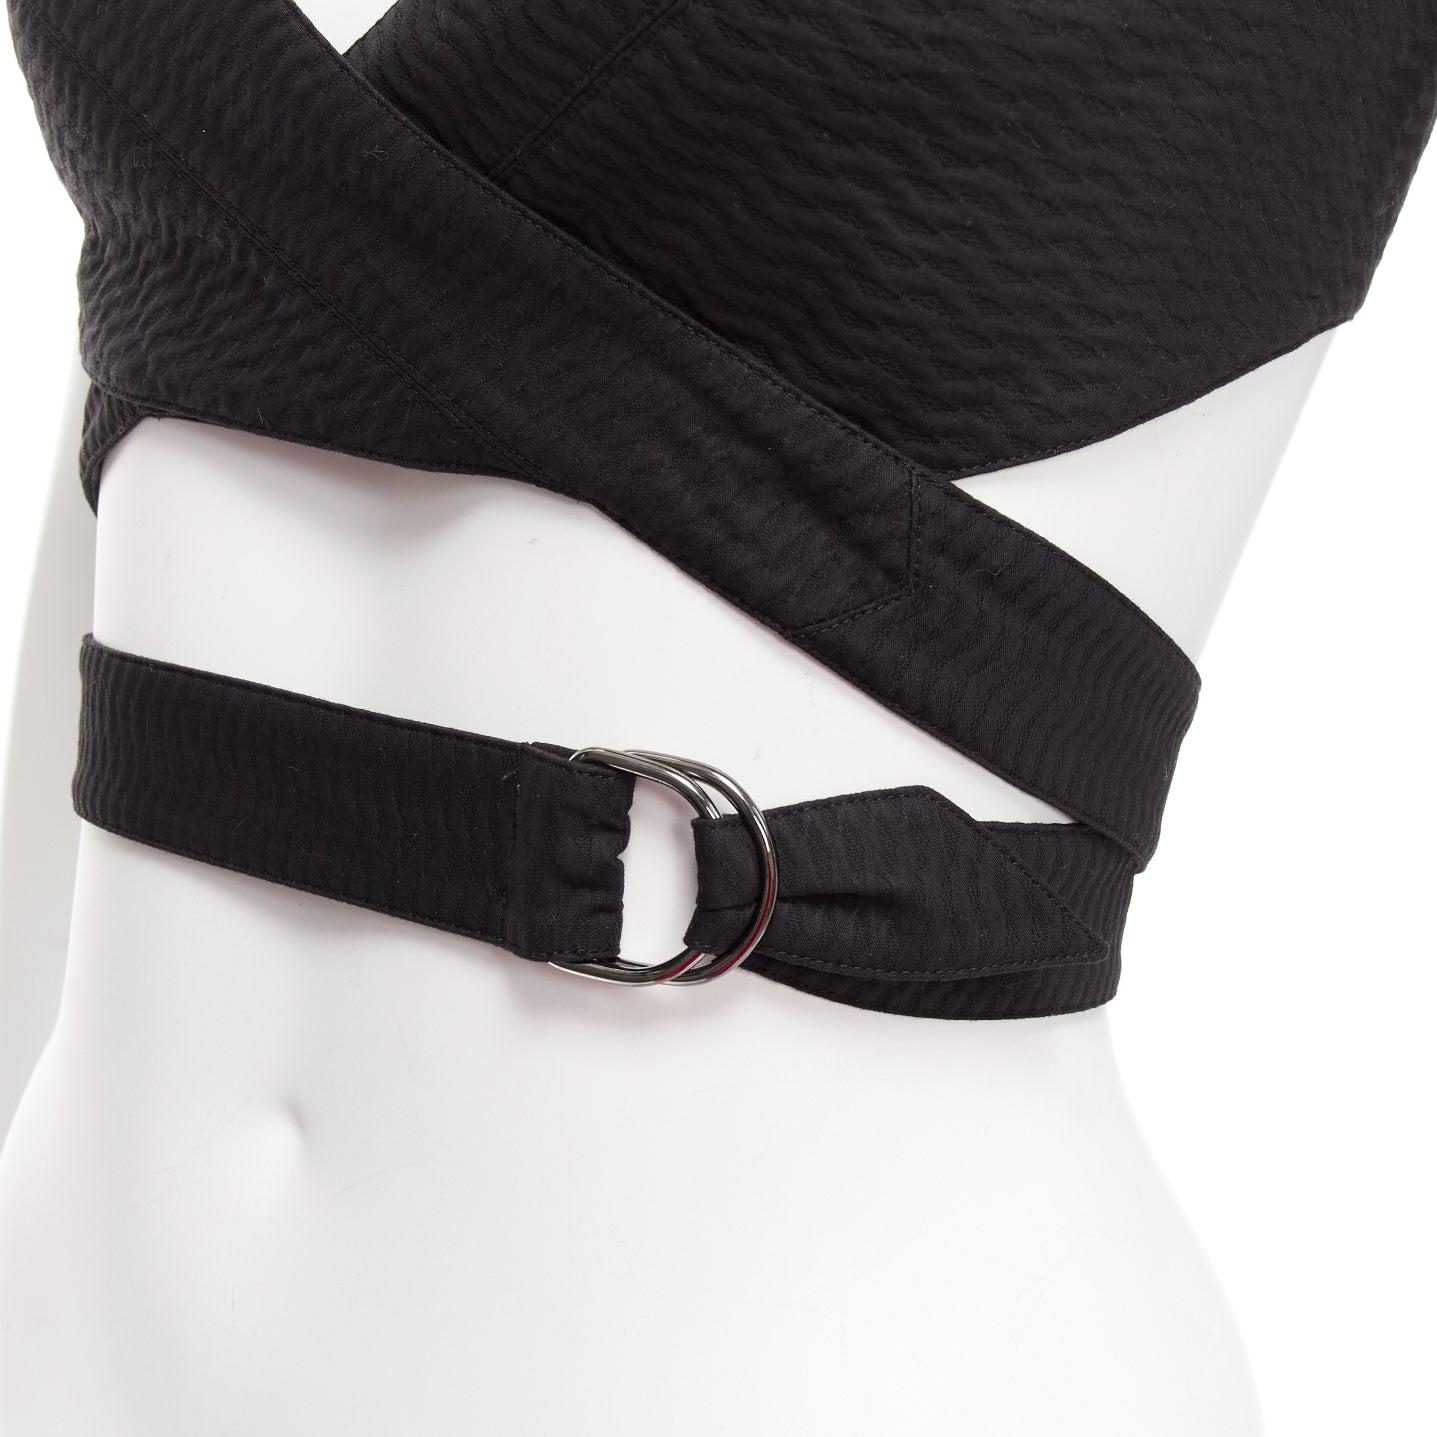 ALAIA black cotton textured jacquard wrap tie belt buckle crop top FR36 S
Reference: LNKO/A02396
Brand: Alaia
Material: Cotton
Color: Black, Silver
Pattern: Solid
Closure: Belt
Lining: Black Fabric
Made in: France

CONDITION:
Condition: Excellent,